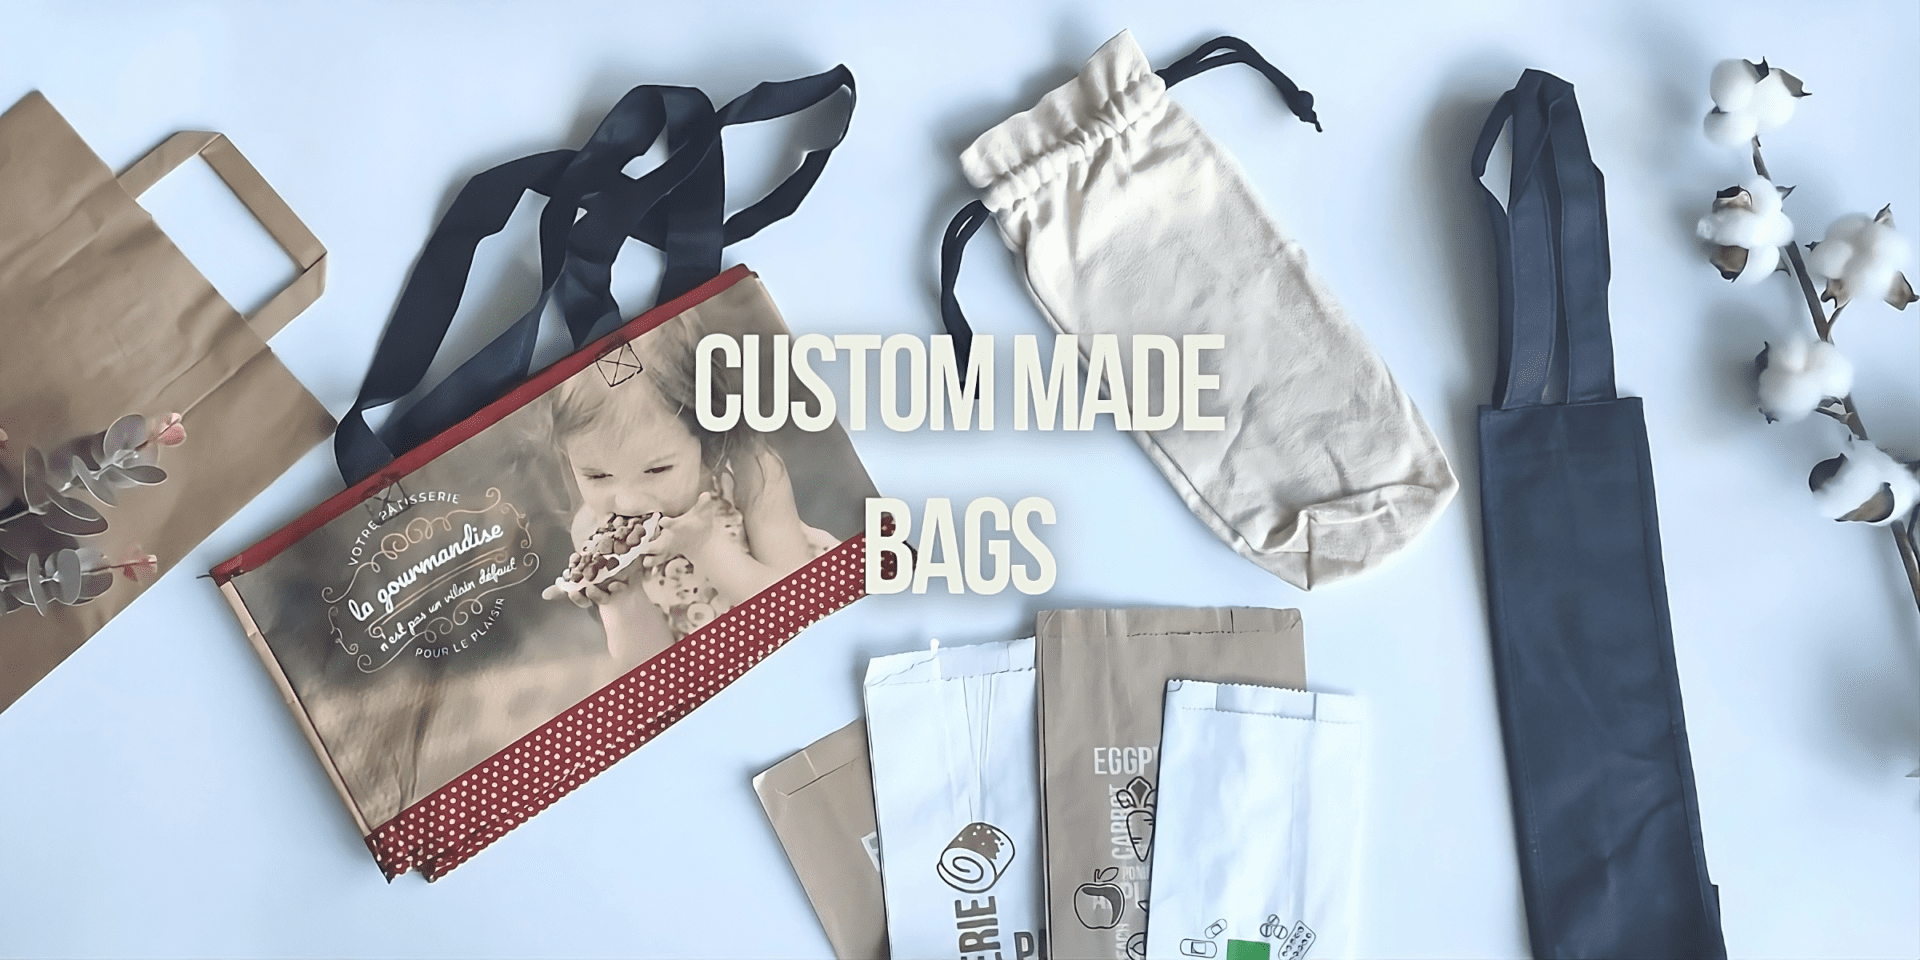 Custom made bags and sacks in cotton, PP and Kraft paper from the Wasteless Group